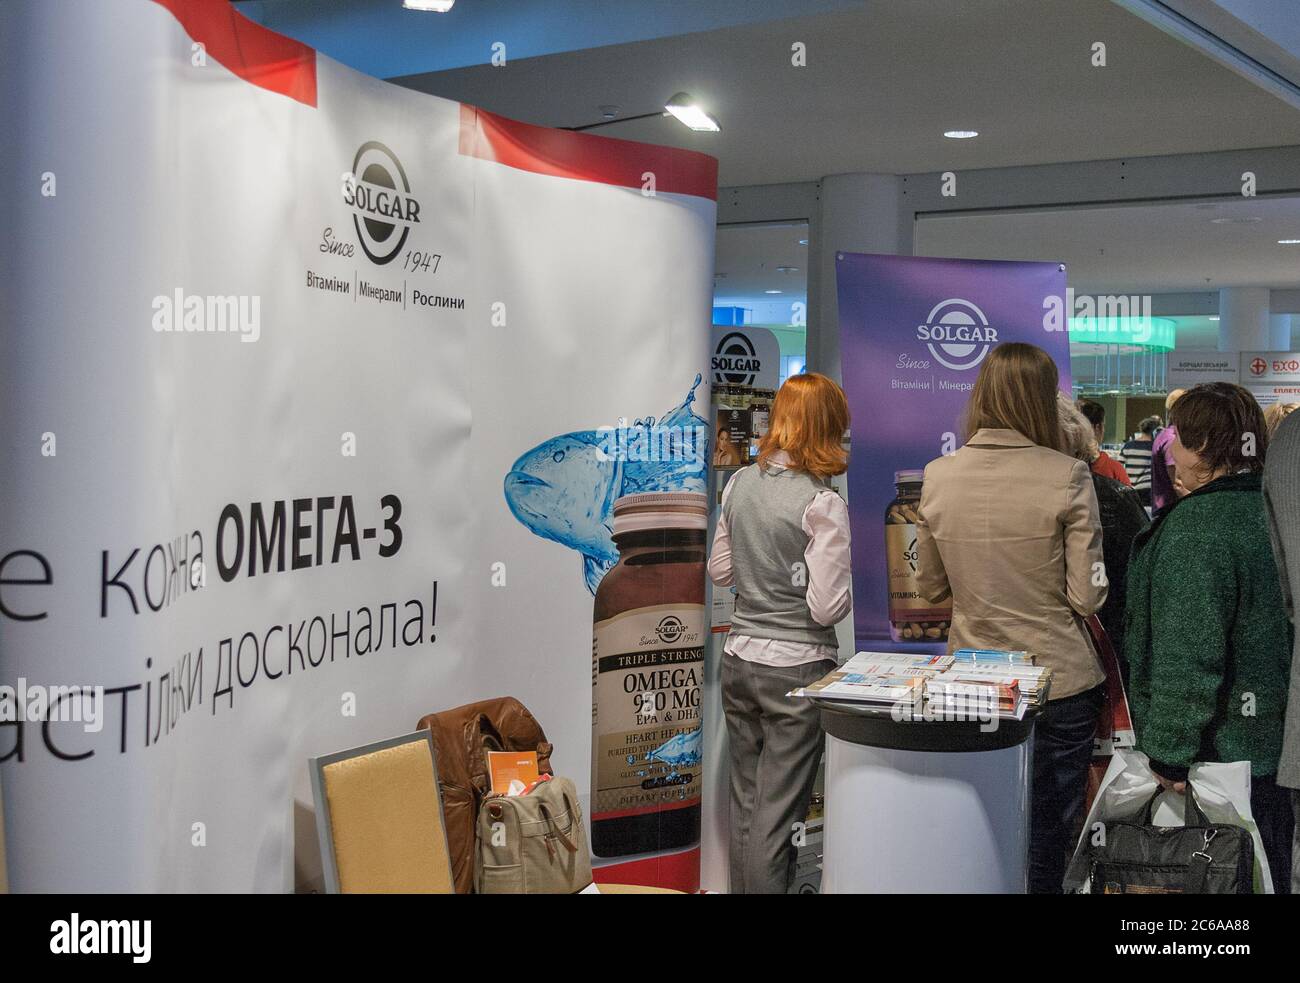 KYIV, UKRAINE - SEPTEMBER 24, 2014: People visit Solgar American food supplements and vitamins company booth by Nature's Bounty Co. at XV National Con Stock Photo